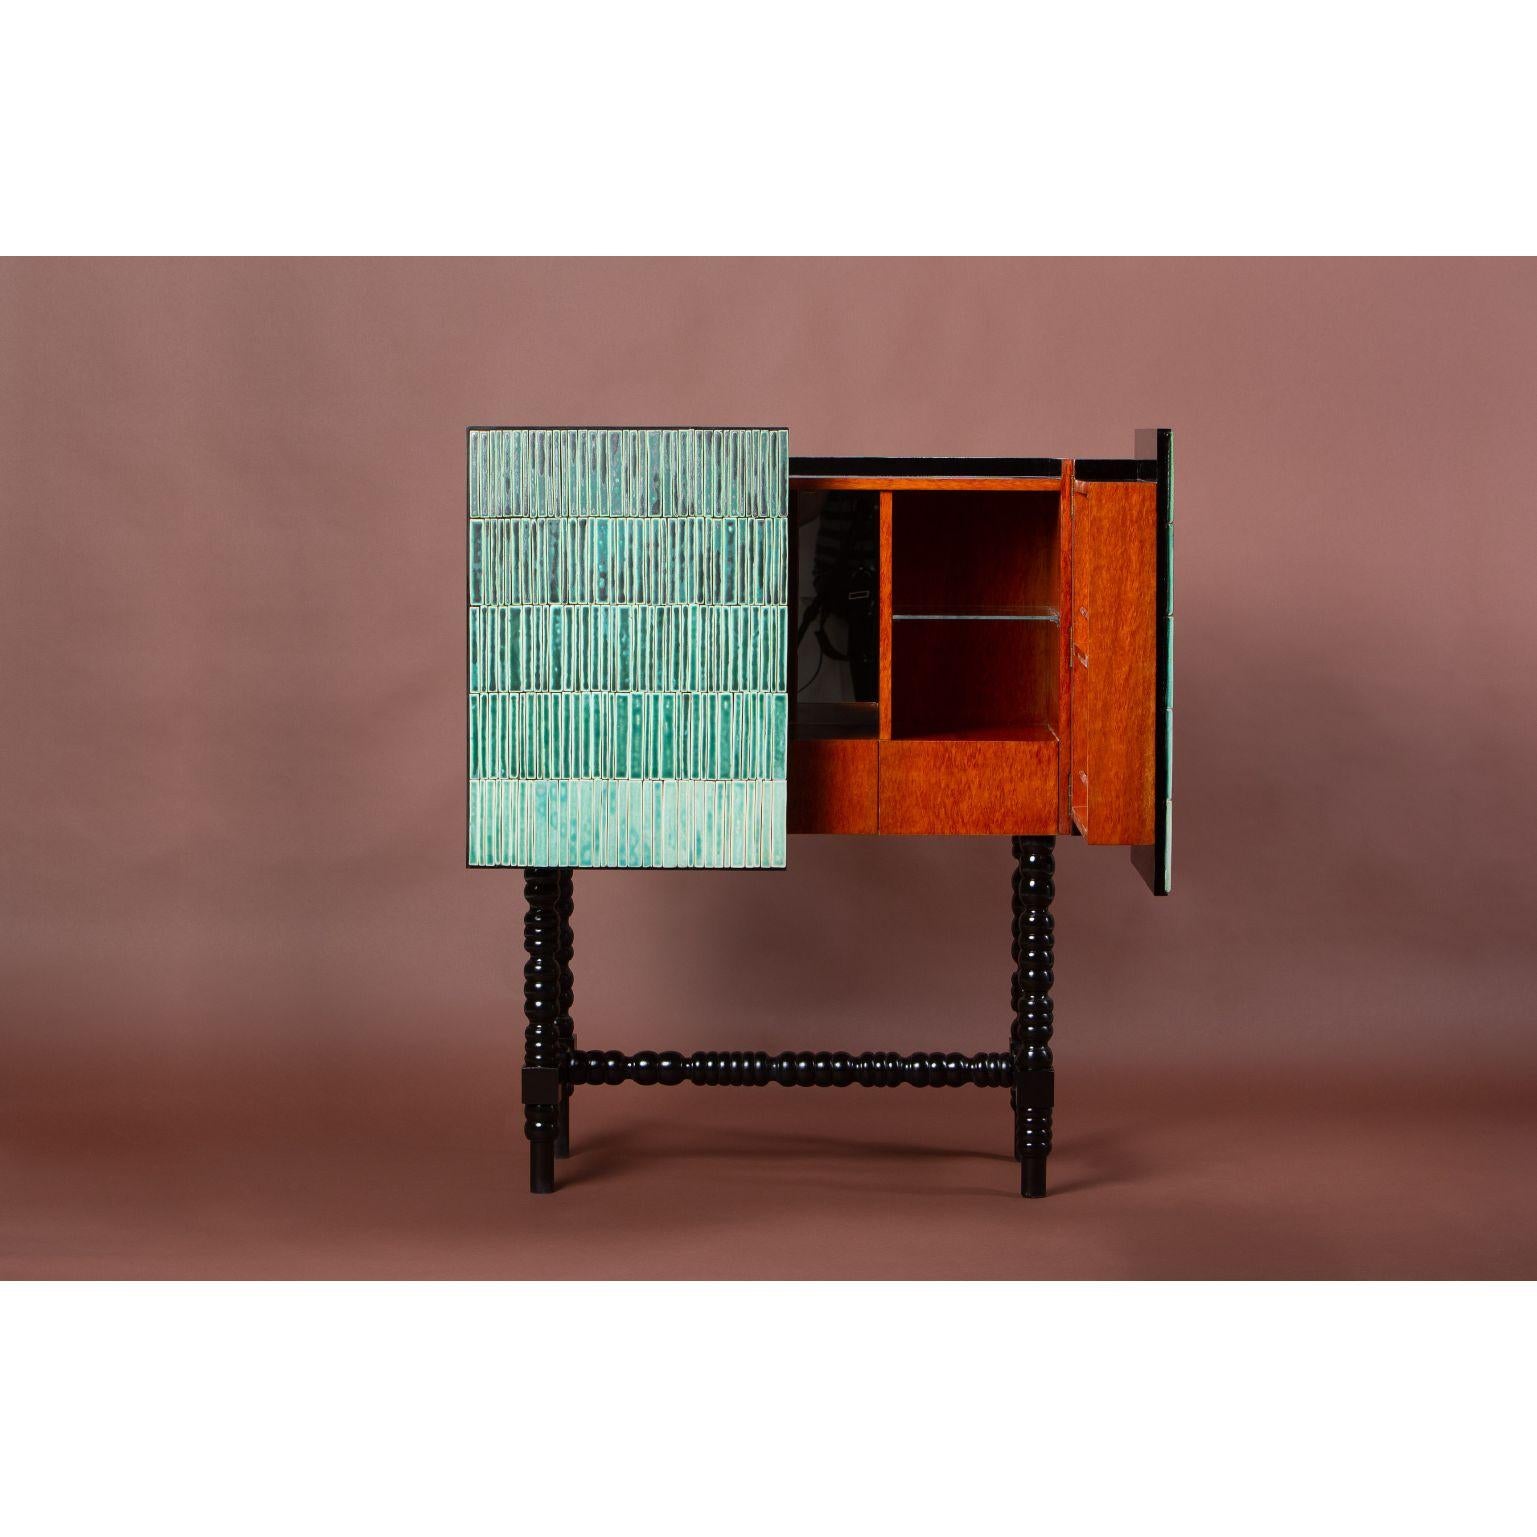 Gradient cabinet - green by Milan Pekar, Jakub Vávra
Dimensions: 102 x 55 x 125 cm
Materials: Glaze, ceramic, beech wood

Hand-crafted in the Czech Republic

Gradient is an original furniture collection combining exotic wood and ceramic